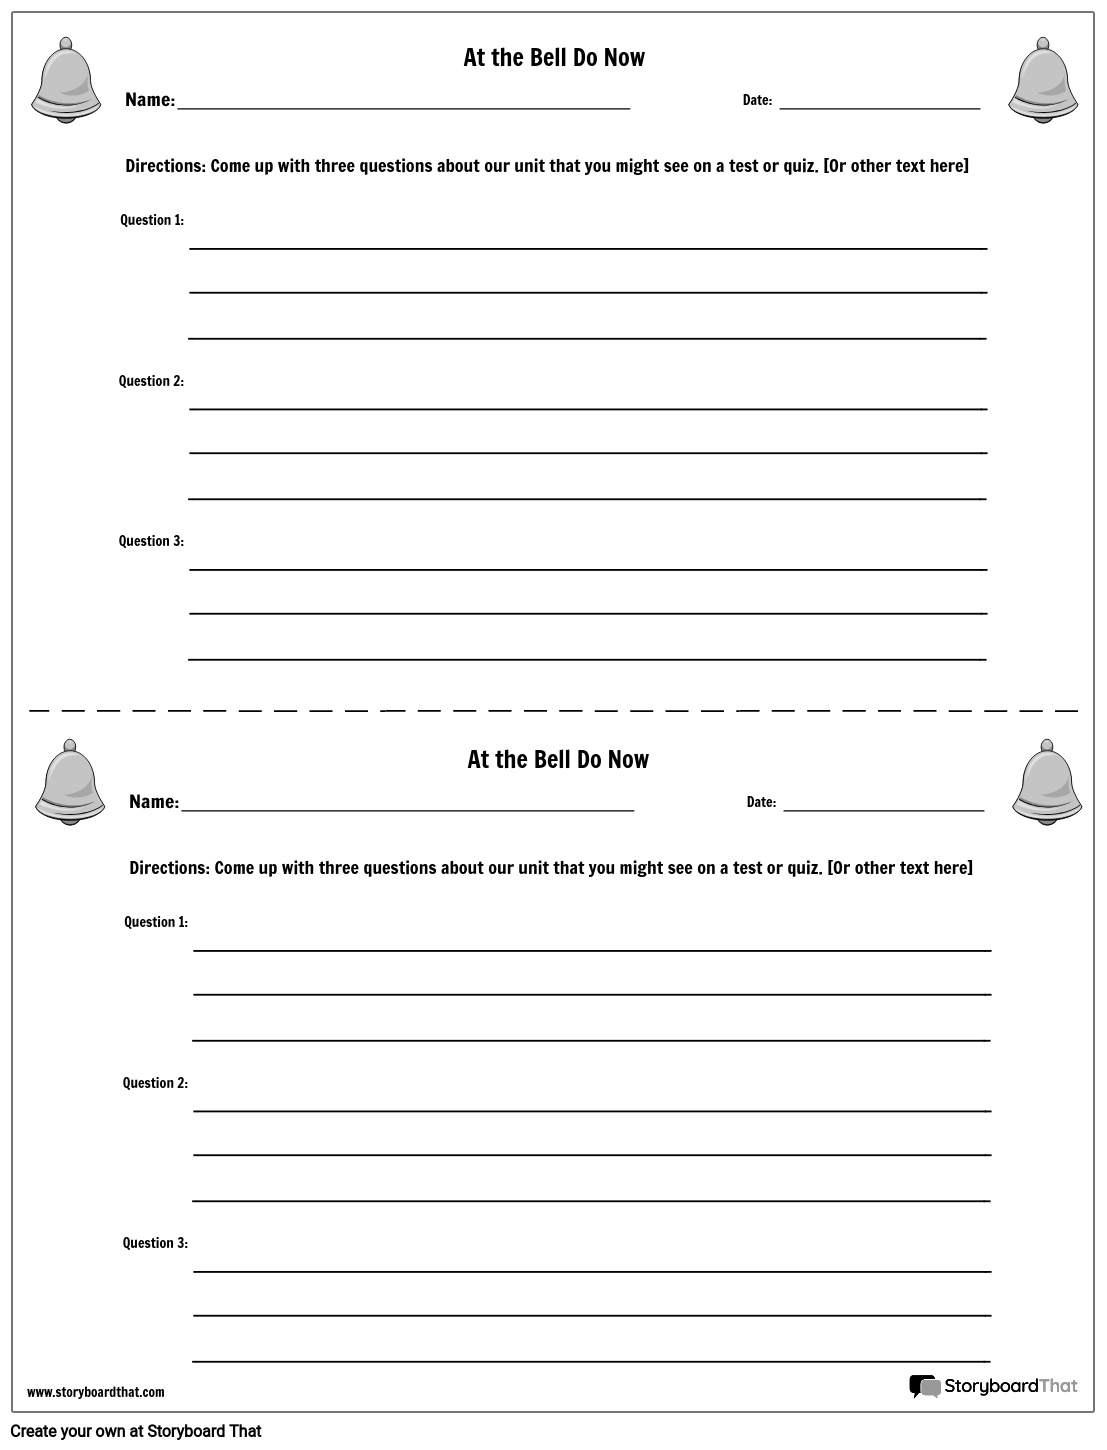 free-printable-bell-ringers-templates-storyboardthat